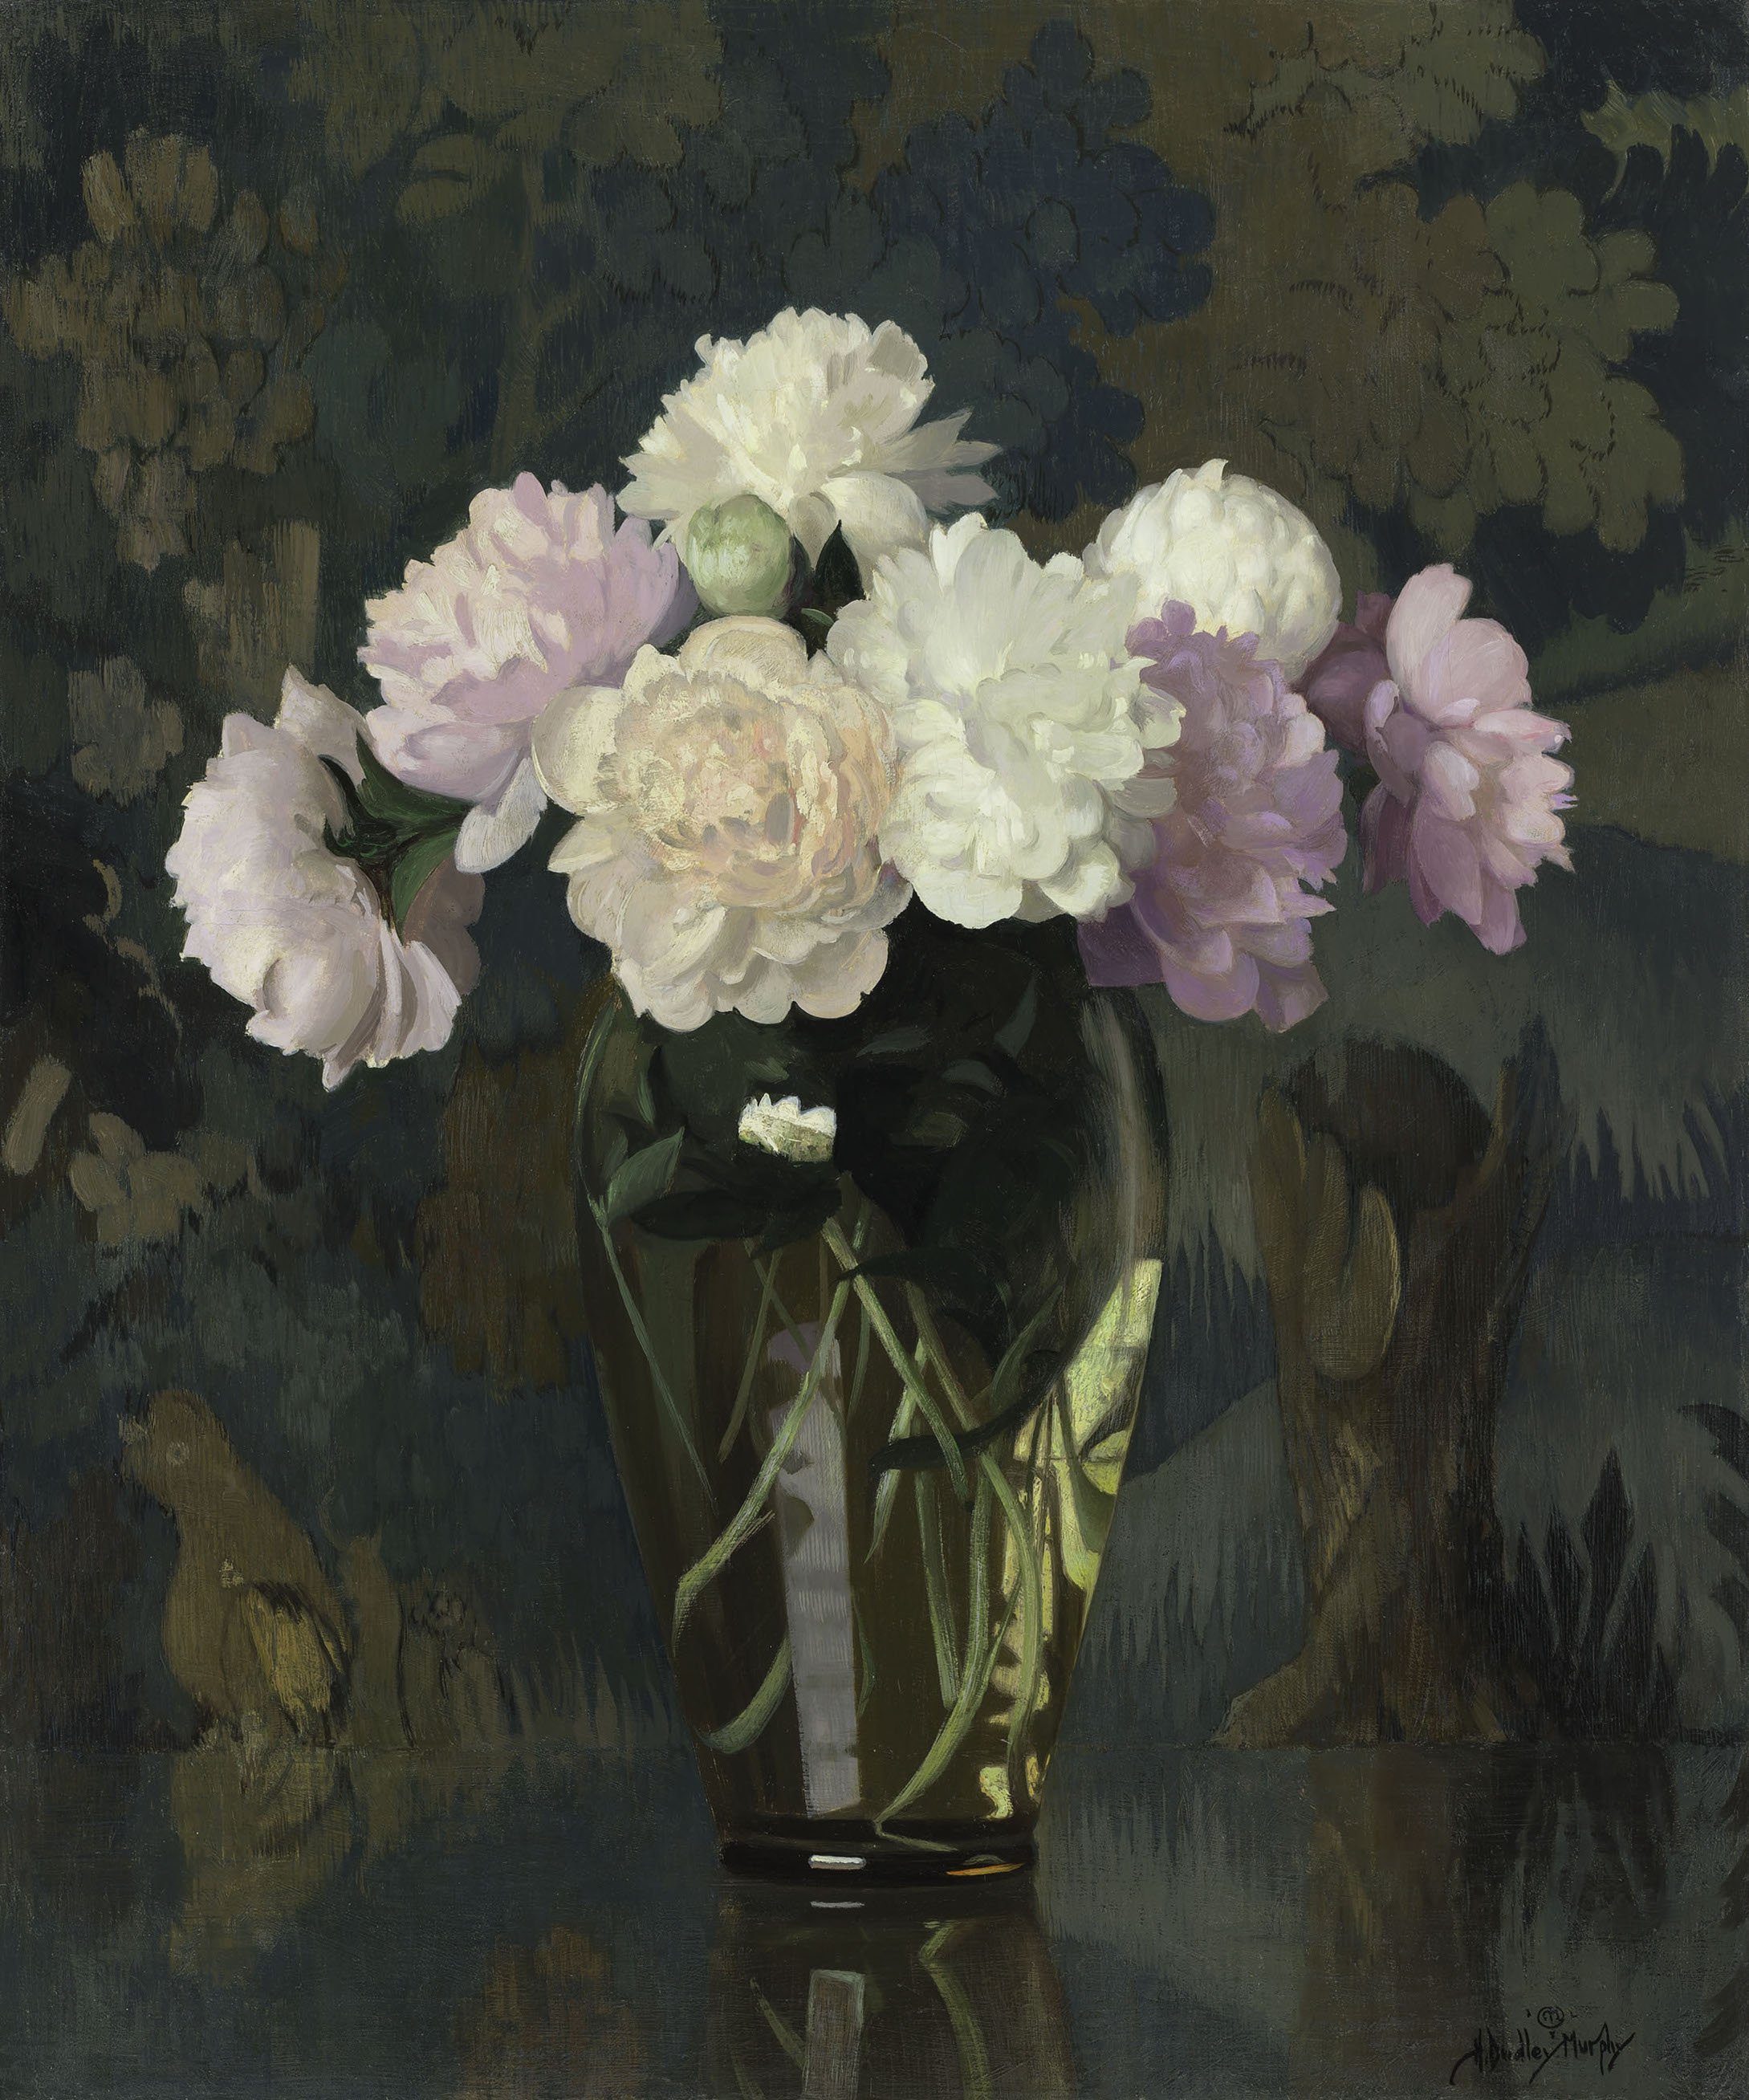 Still life of white, pink, and peach peonies in a glass vase on a table with a green-blue forest tapestry behind.